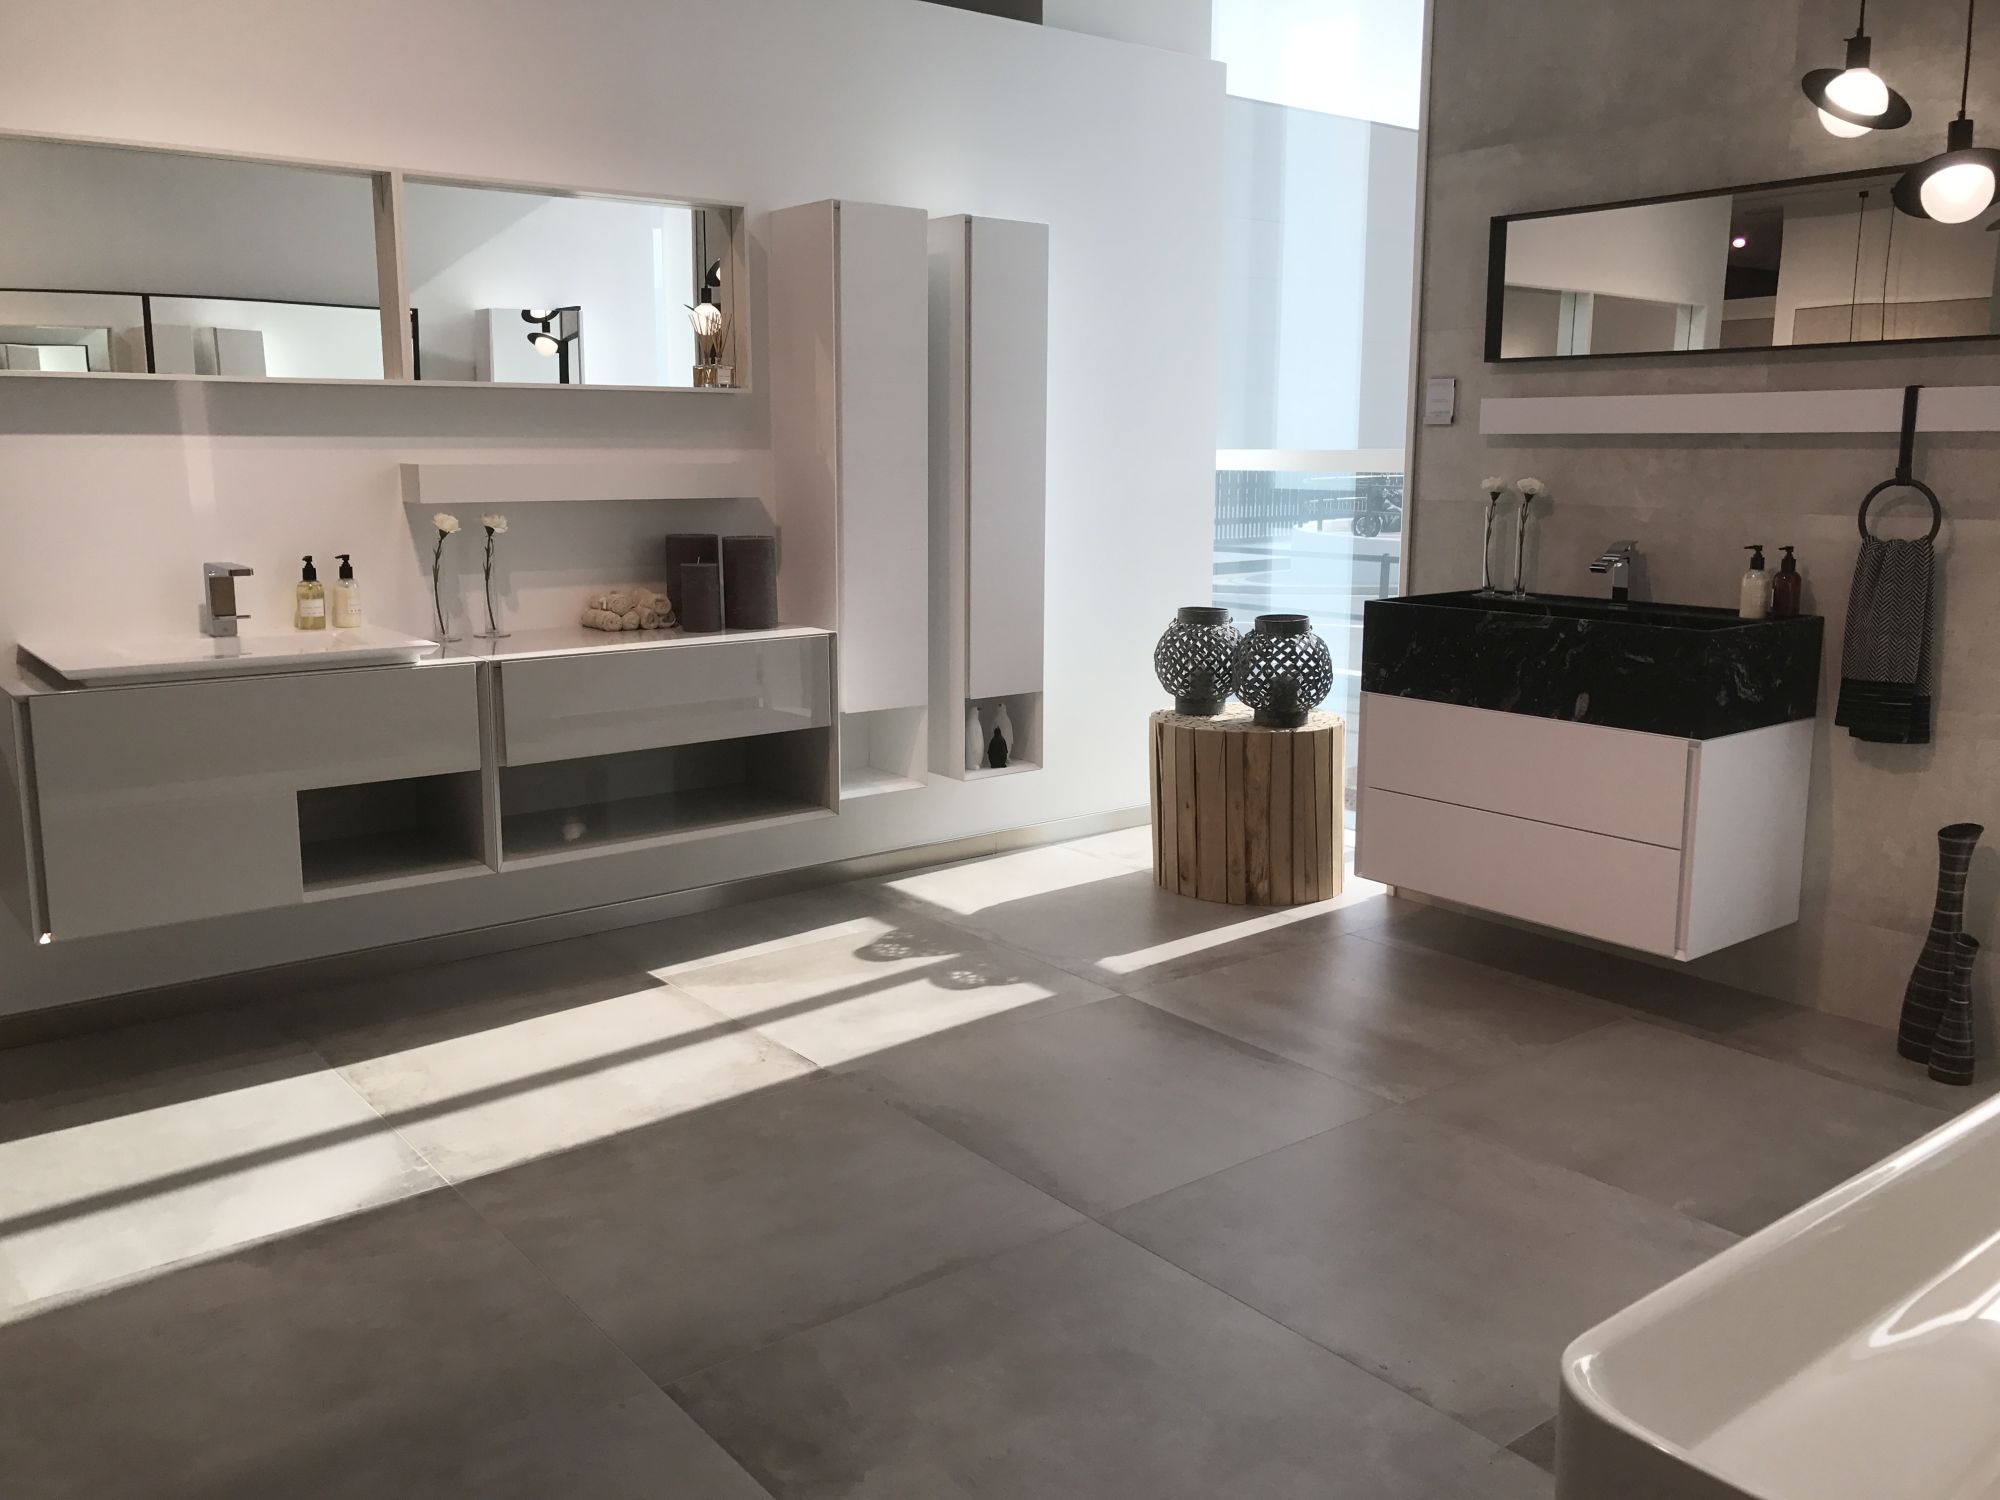 State of the art bathroom furniture - GamaDecor